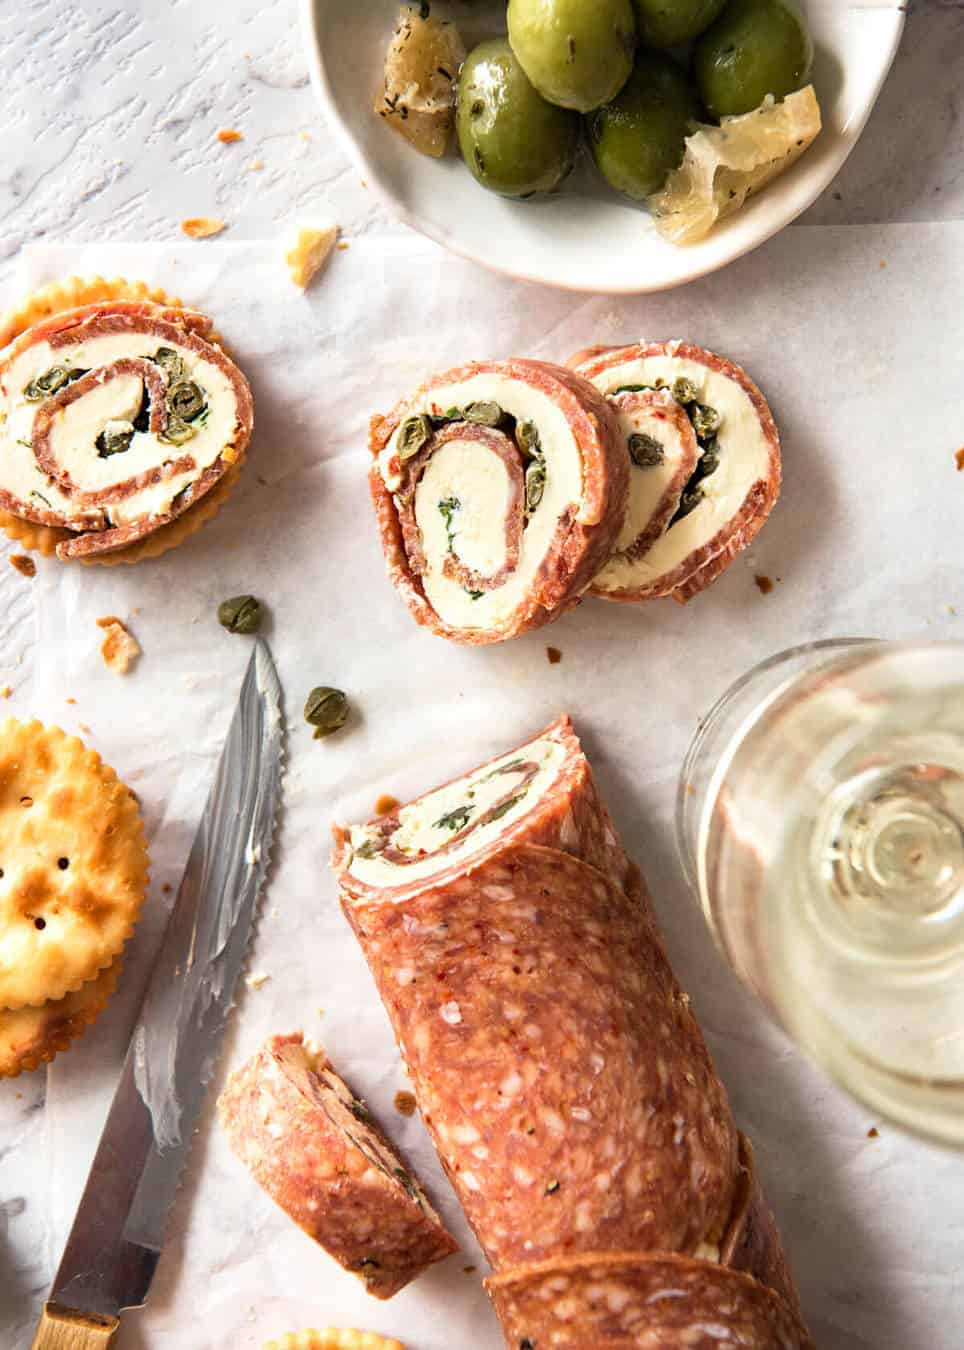 Salami Cream Cheese Roll Up - Great inexpensive party food idea! recipetineats.com